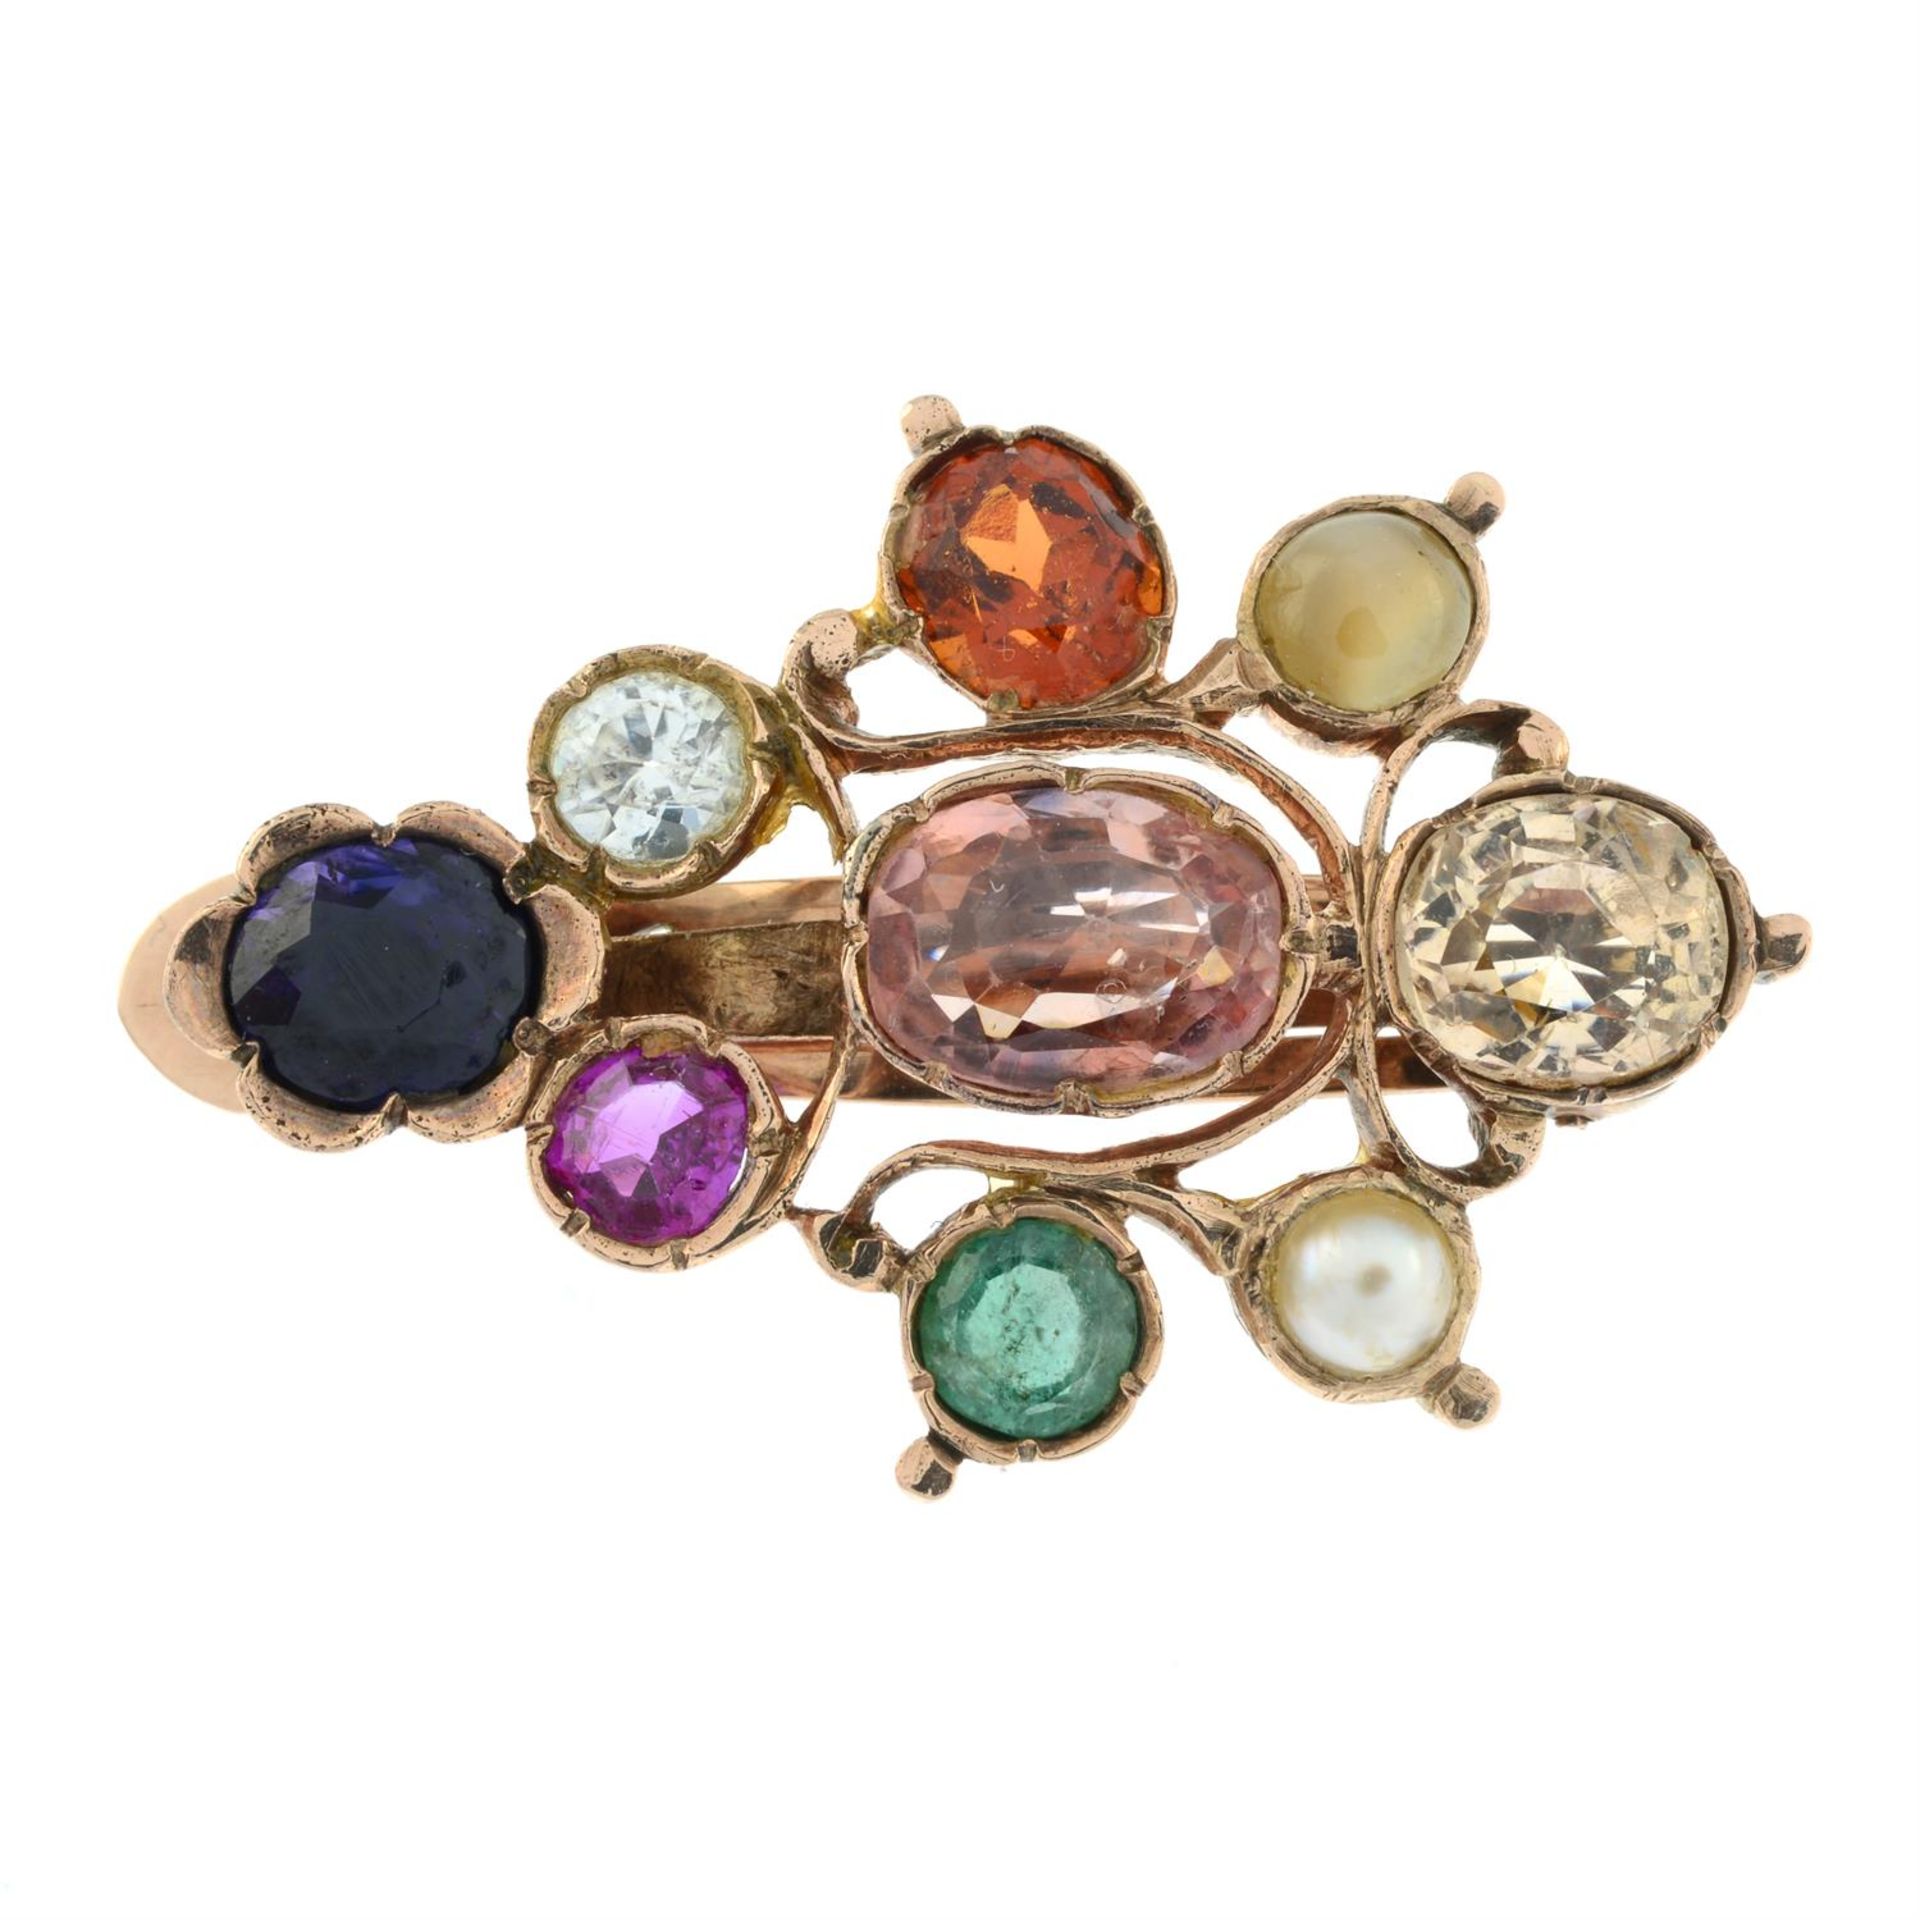 An early to mid 20th century gold Navaratna type clip, the Sri Lankan peach sapphire with yellow, - Image 2 of 5